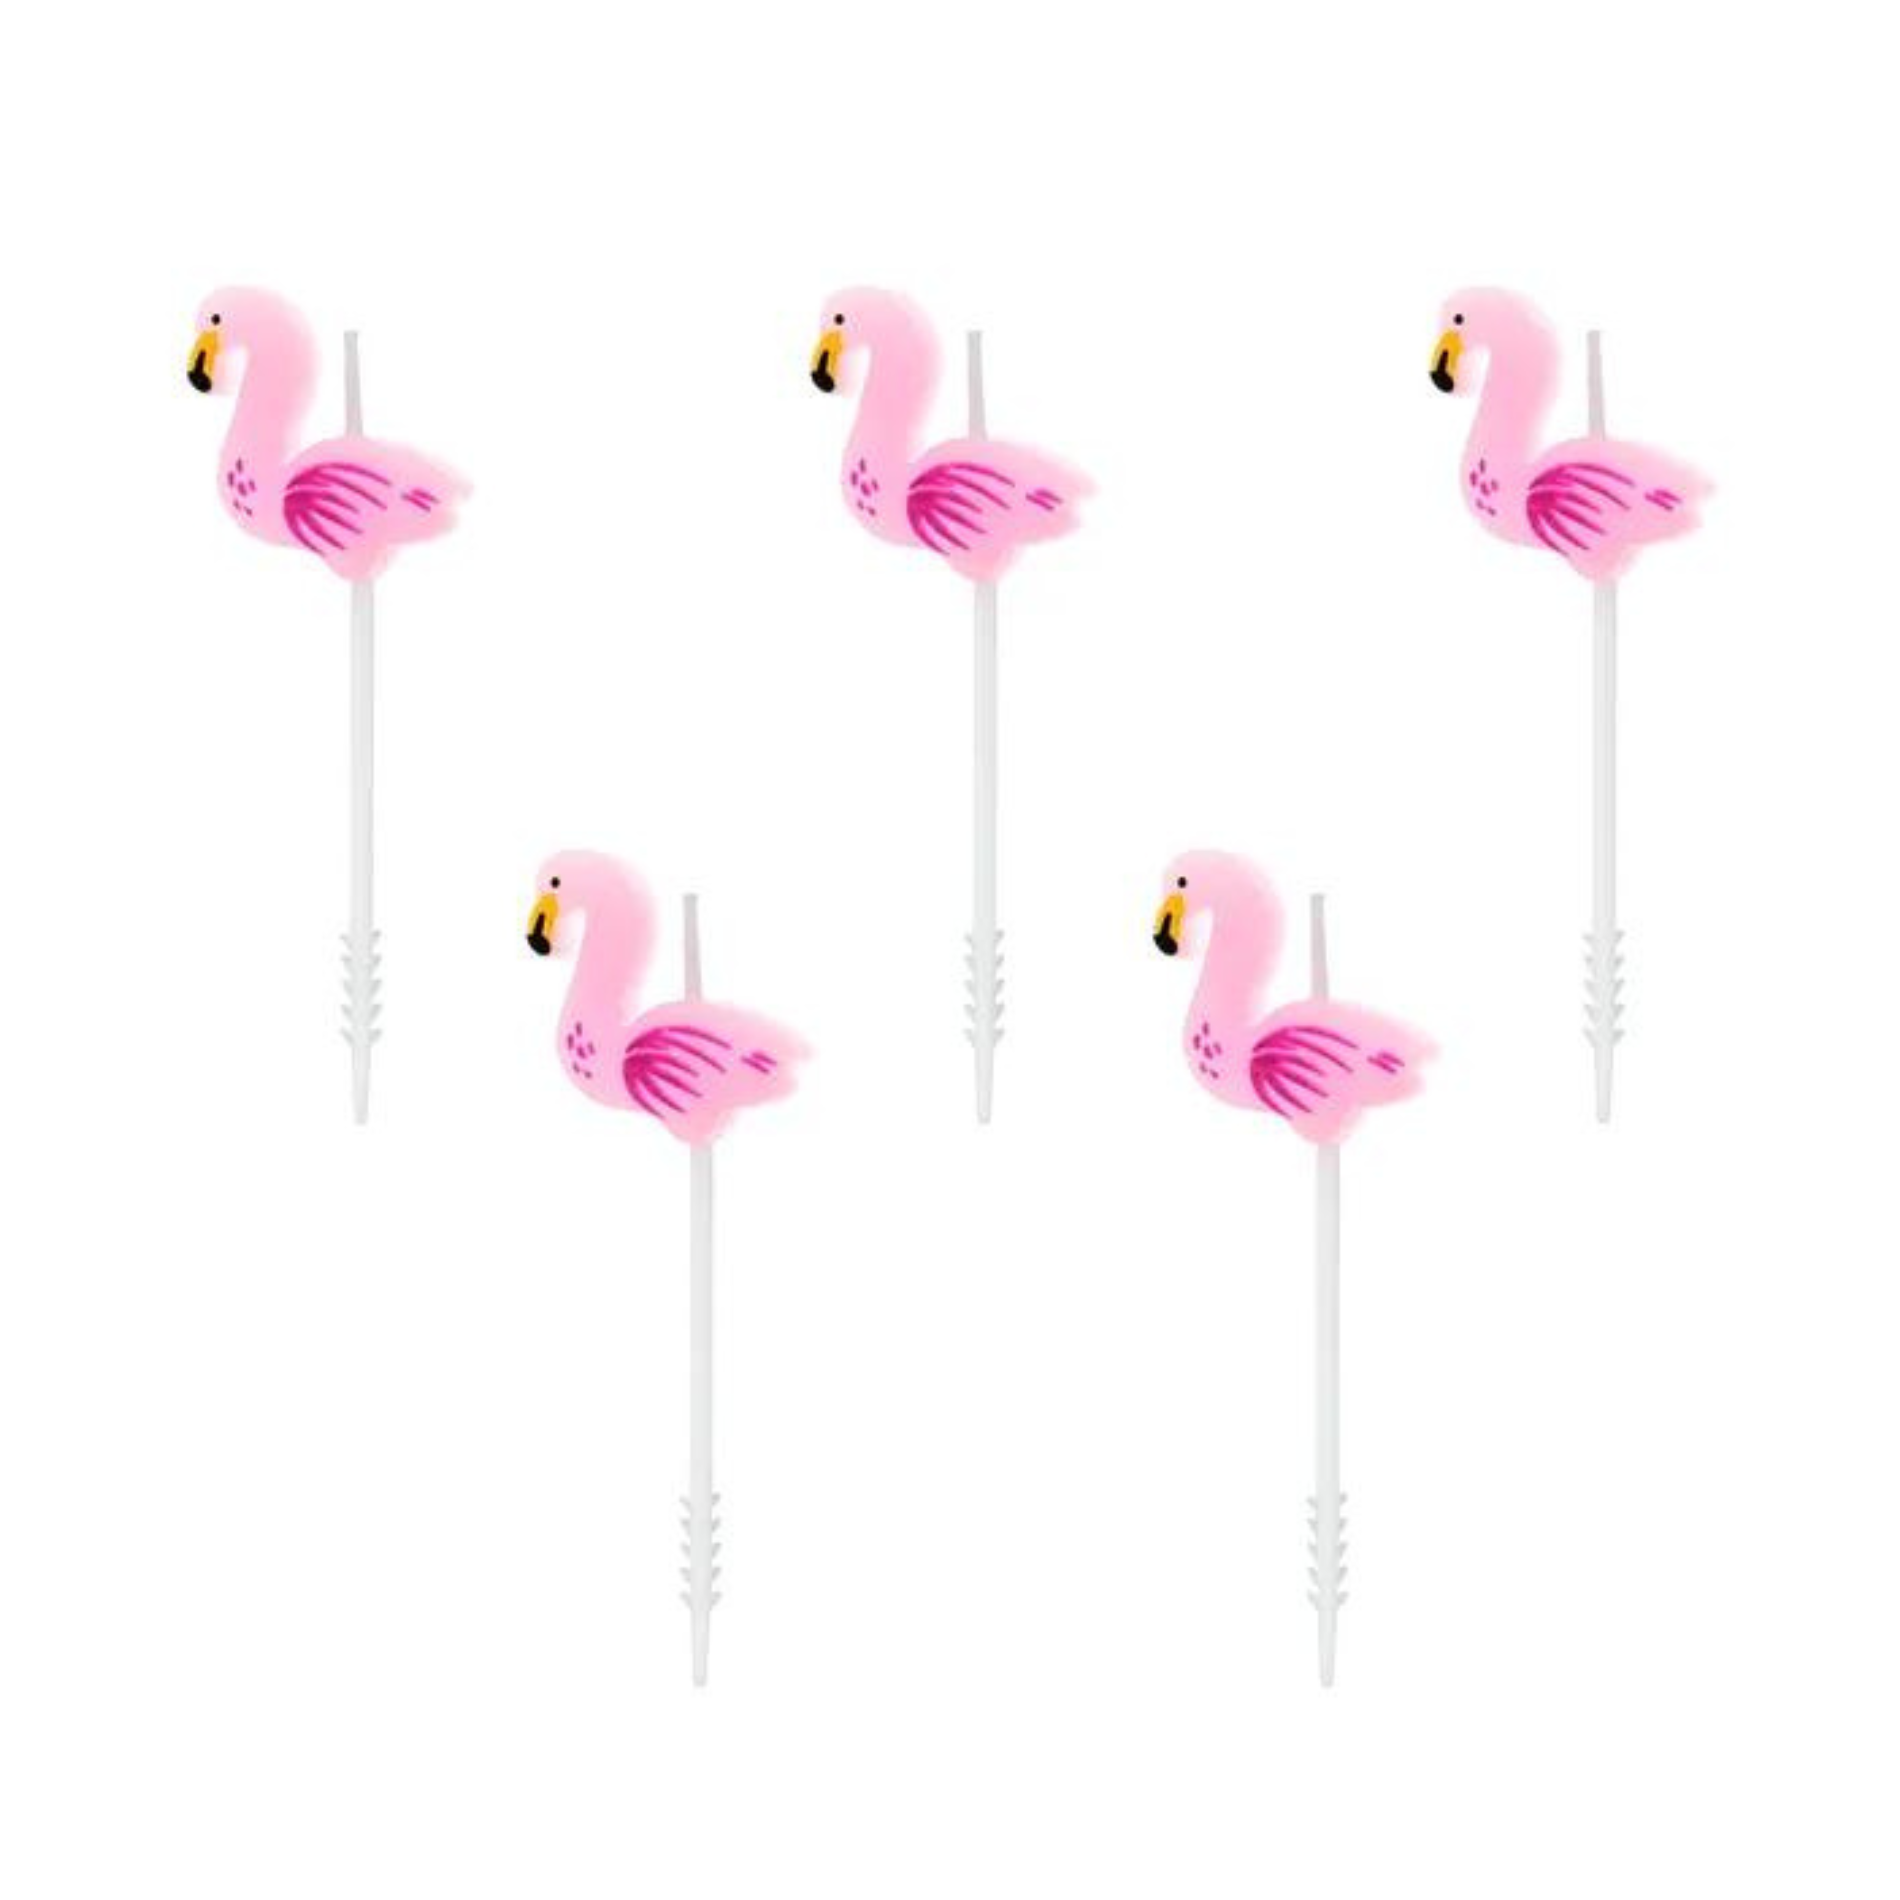 flamingo shaped party candles